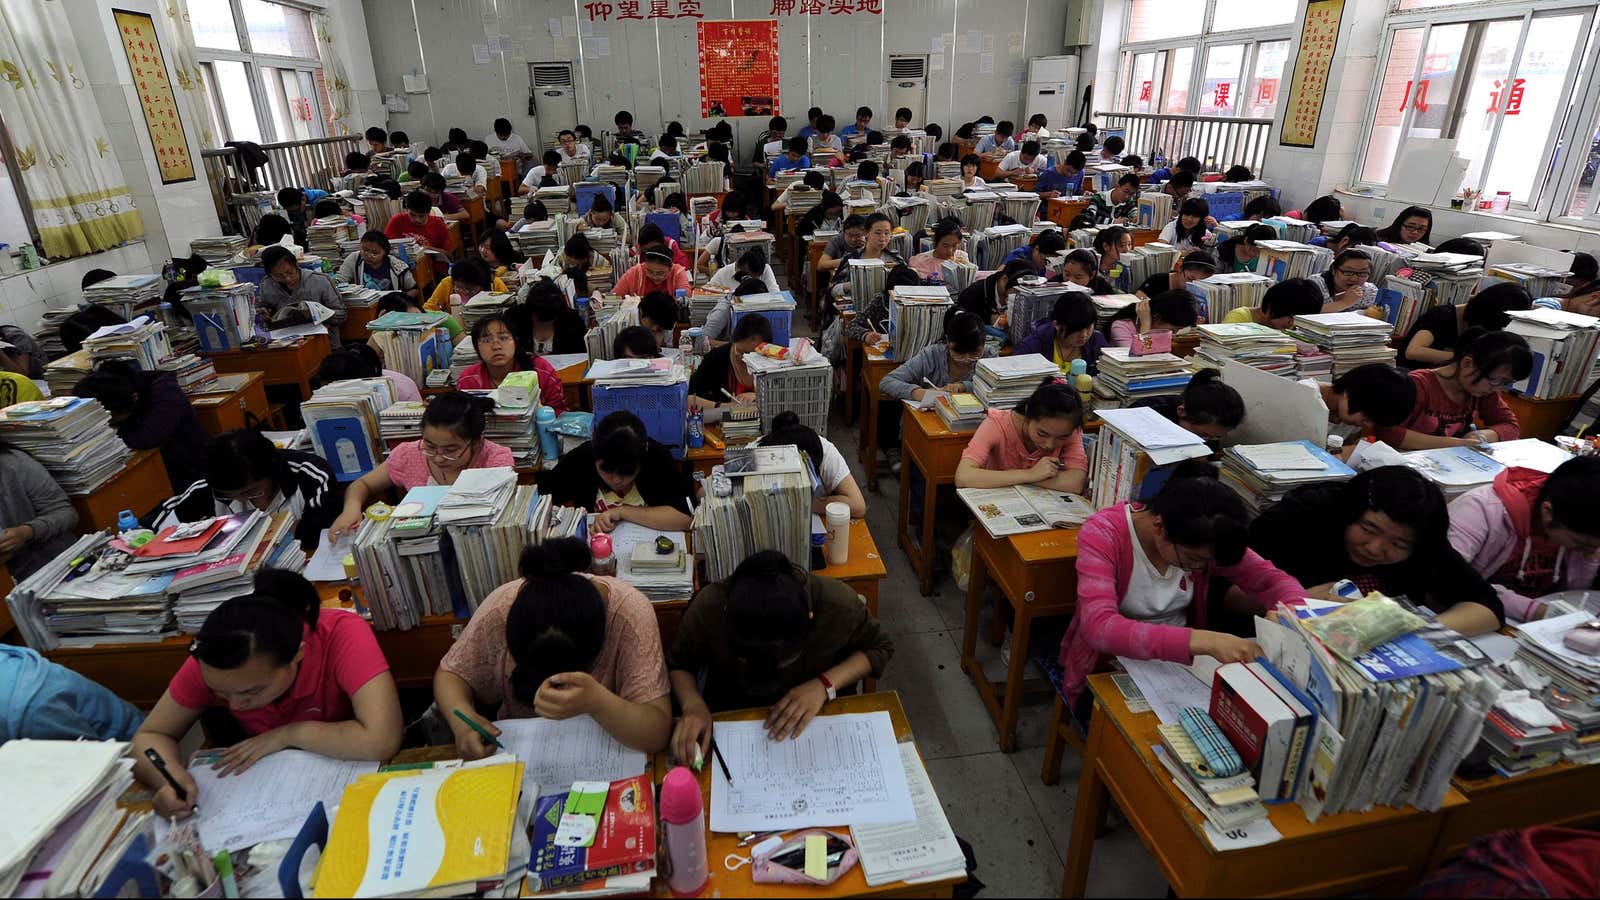 Students prepare for the university entrance exam in a classroom in Hefei, Anhui Province June 2, 2012. The National College Entrance Exam, or “Gaokao”, is…